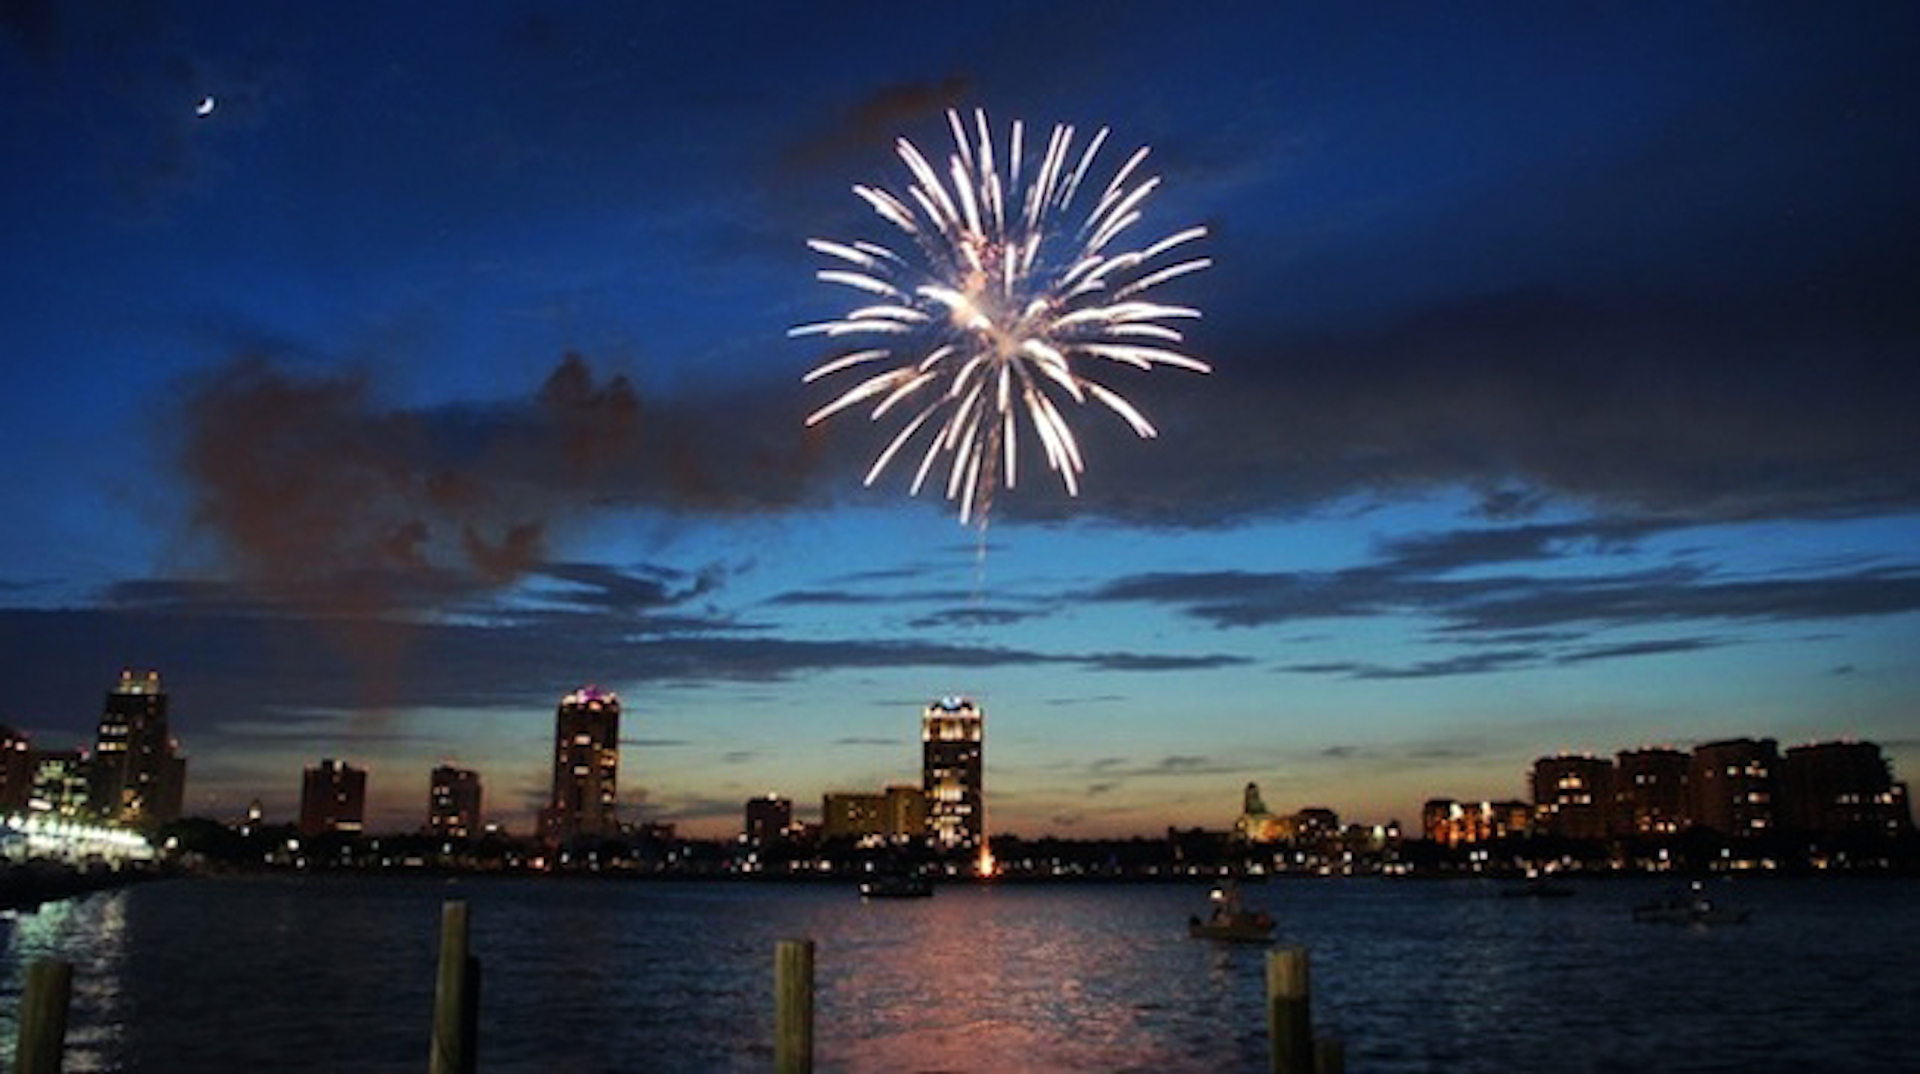 Pier Events LLC Presents The Fourth at the St. Pete Pier July 4